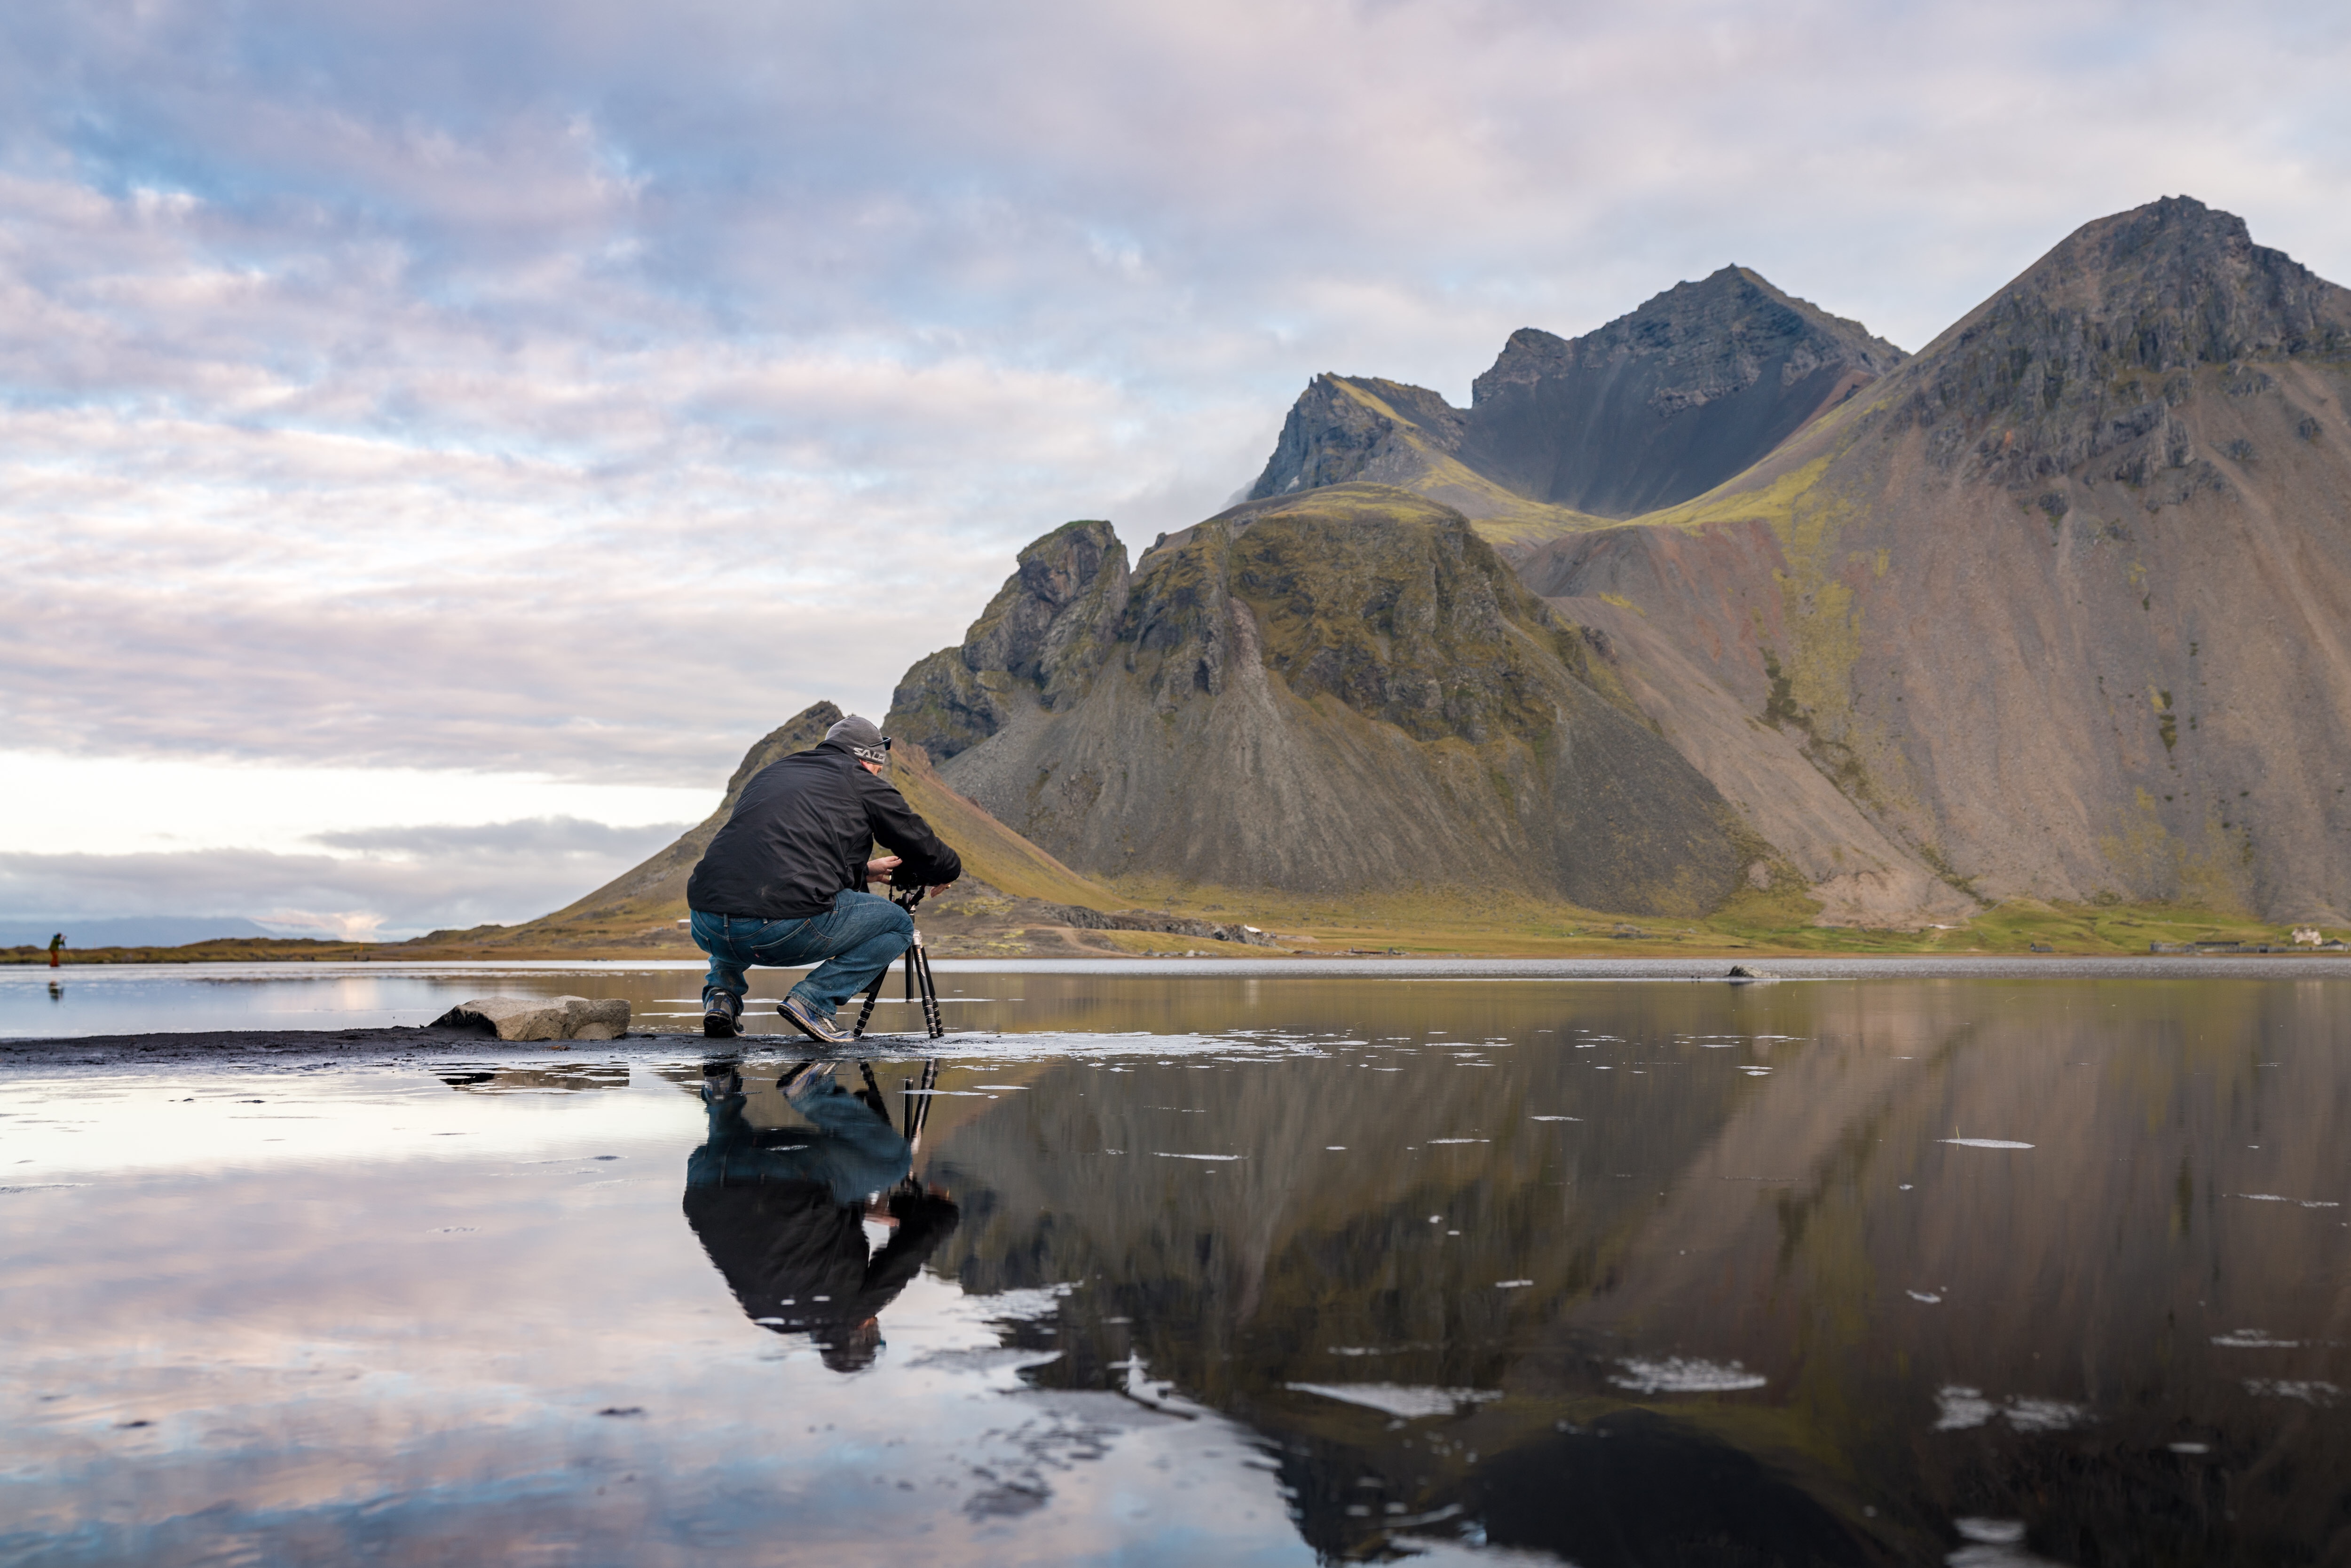 a man sitting on a mirror in a lake with mountains in the background